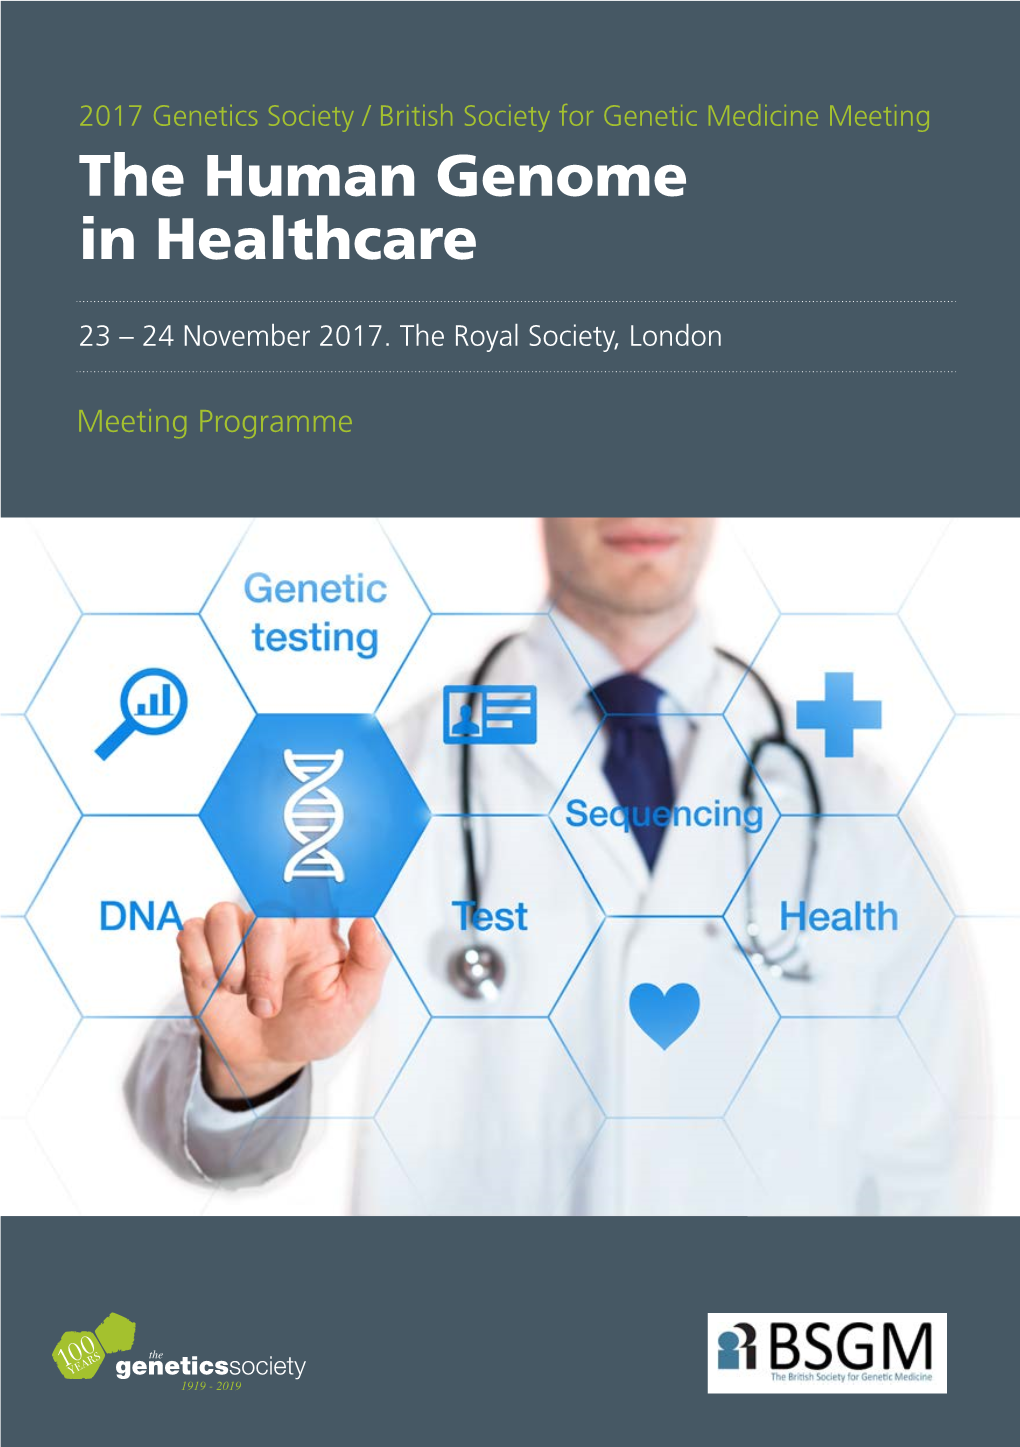 The Human Genome in Healthcare